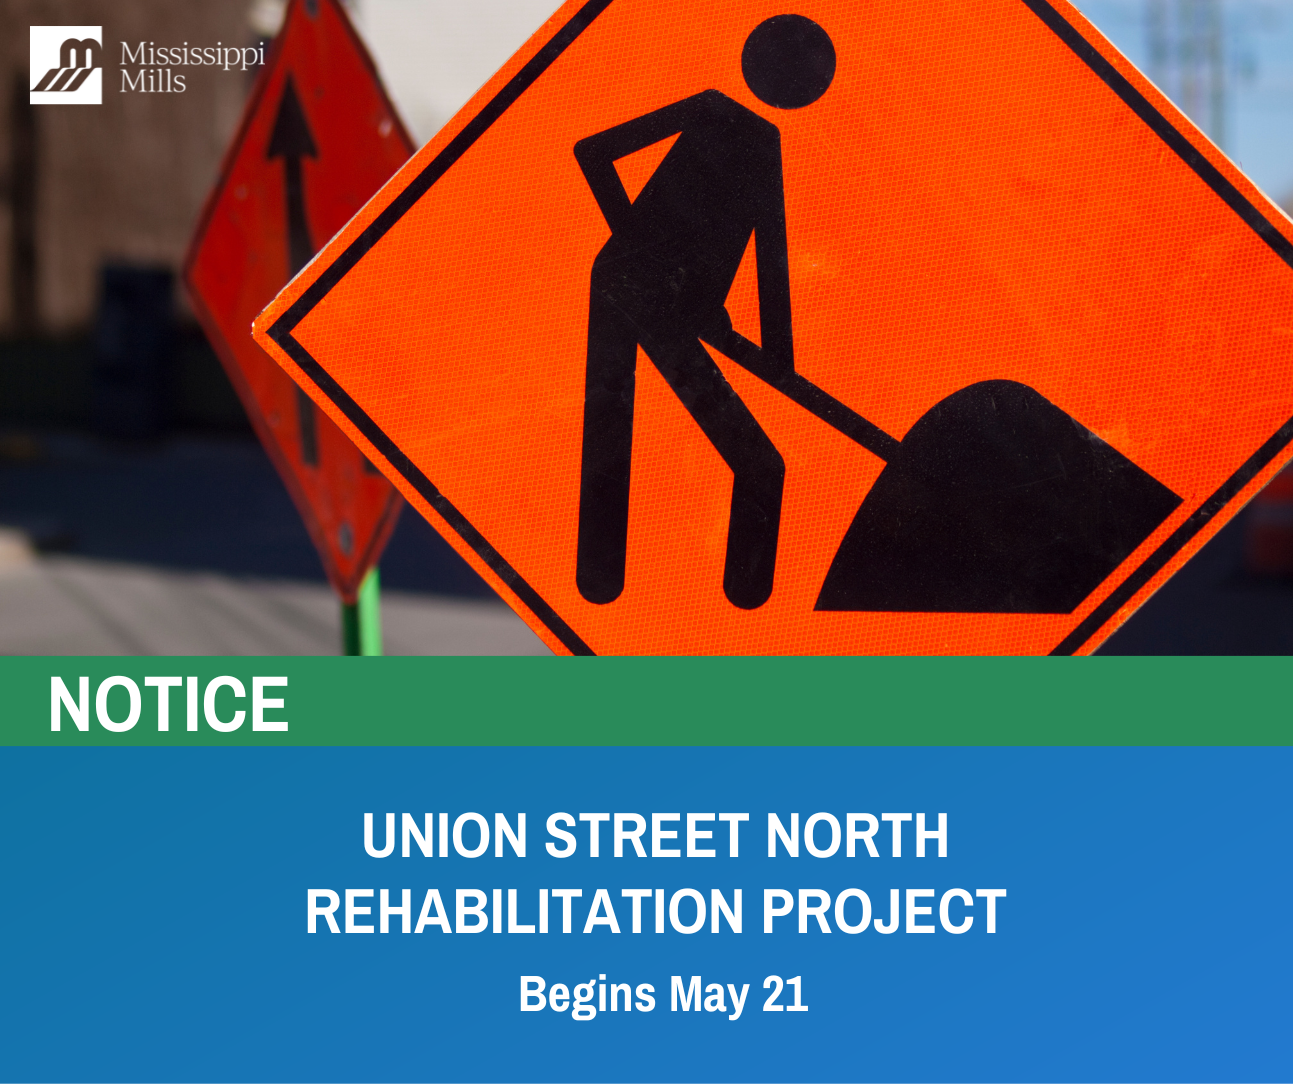 Green and blue graphic with text 'Union Street North Rehabilitation Project Begins May 21' and photo of an orange construction sign 